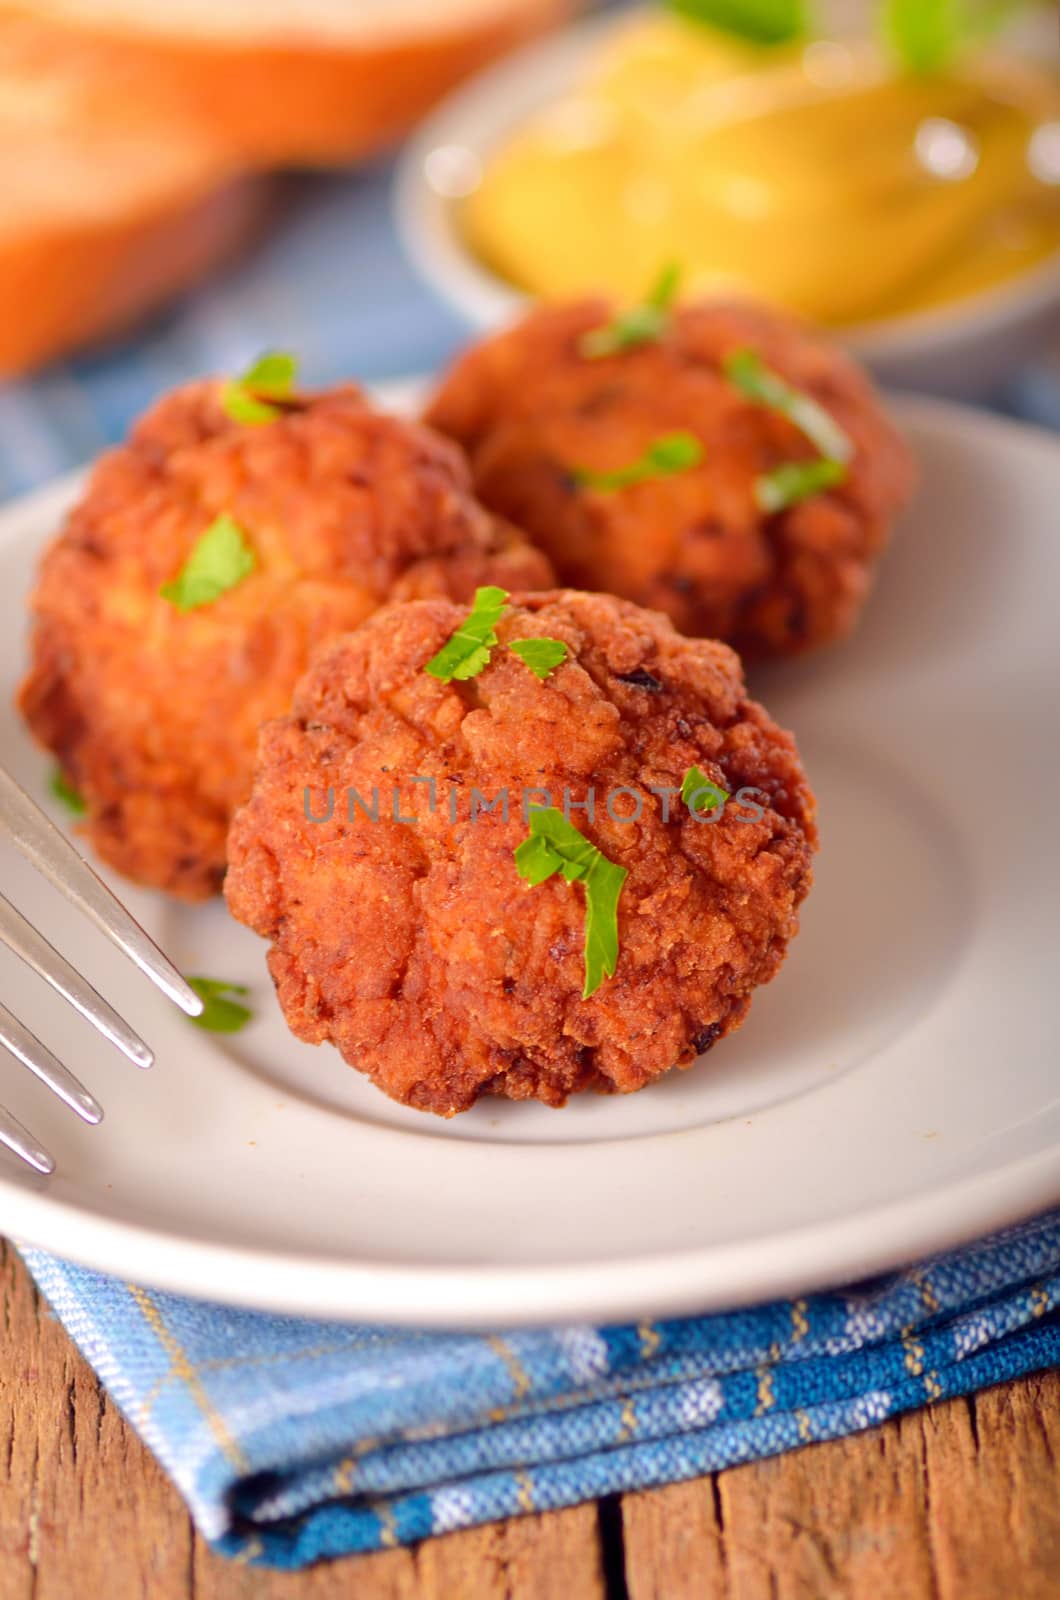  meat balls with mustard on white dish on wooden backgrounds